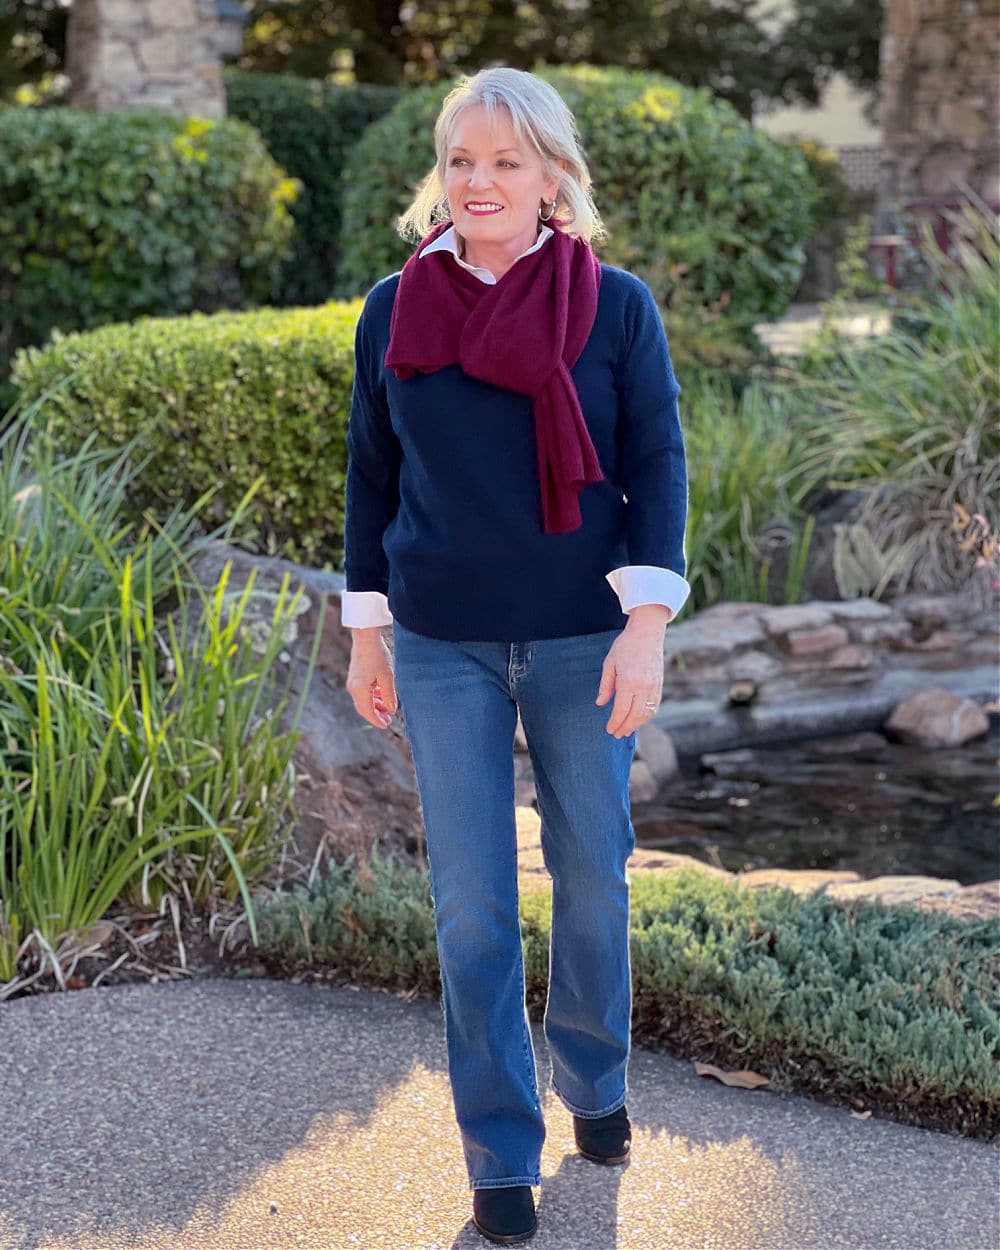 jennifer connolly of a well style life wearing navy cashmere sweater and cashmere scarf with bootcut jeans